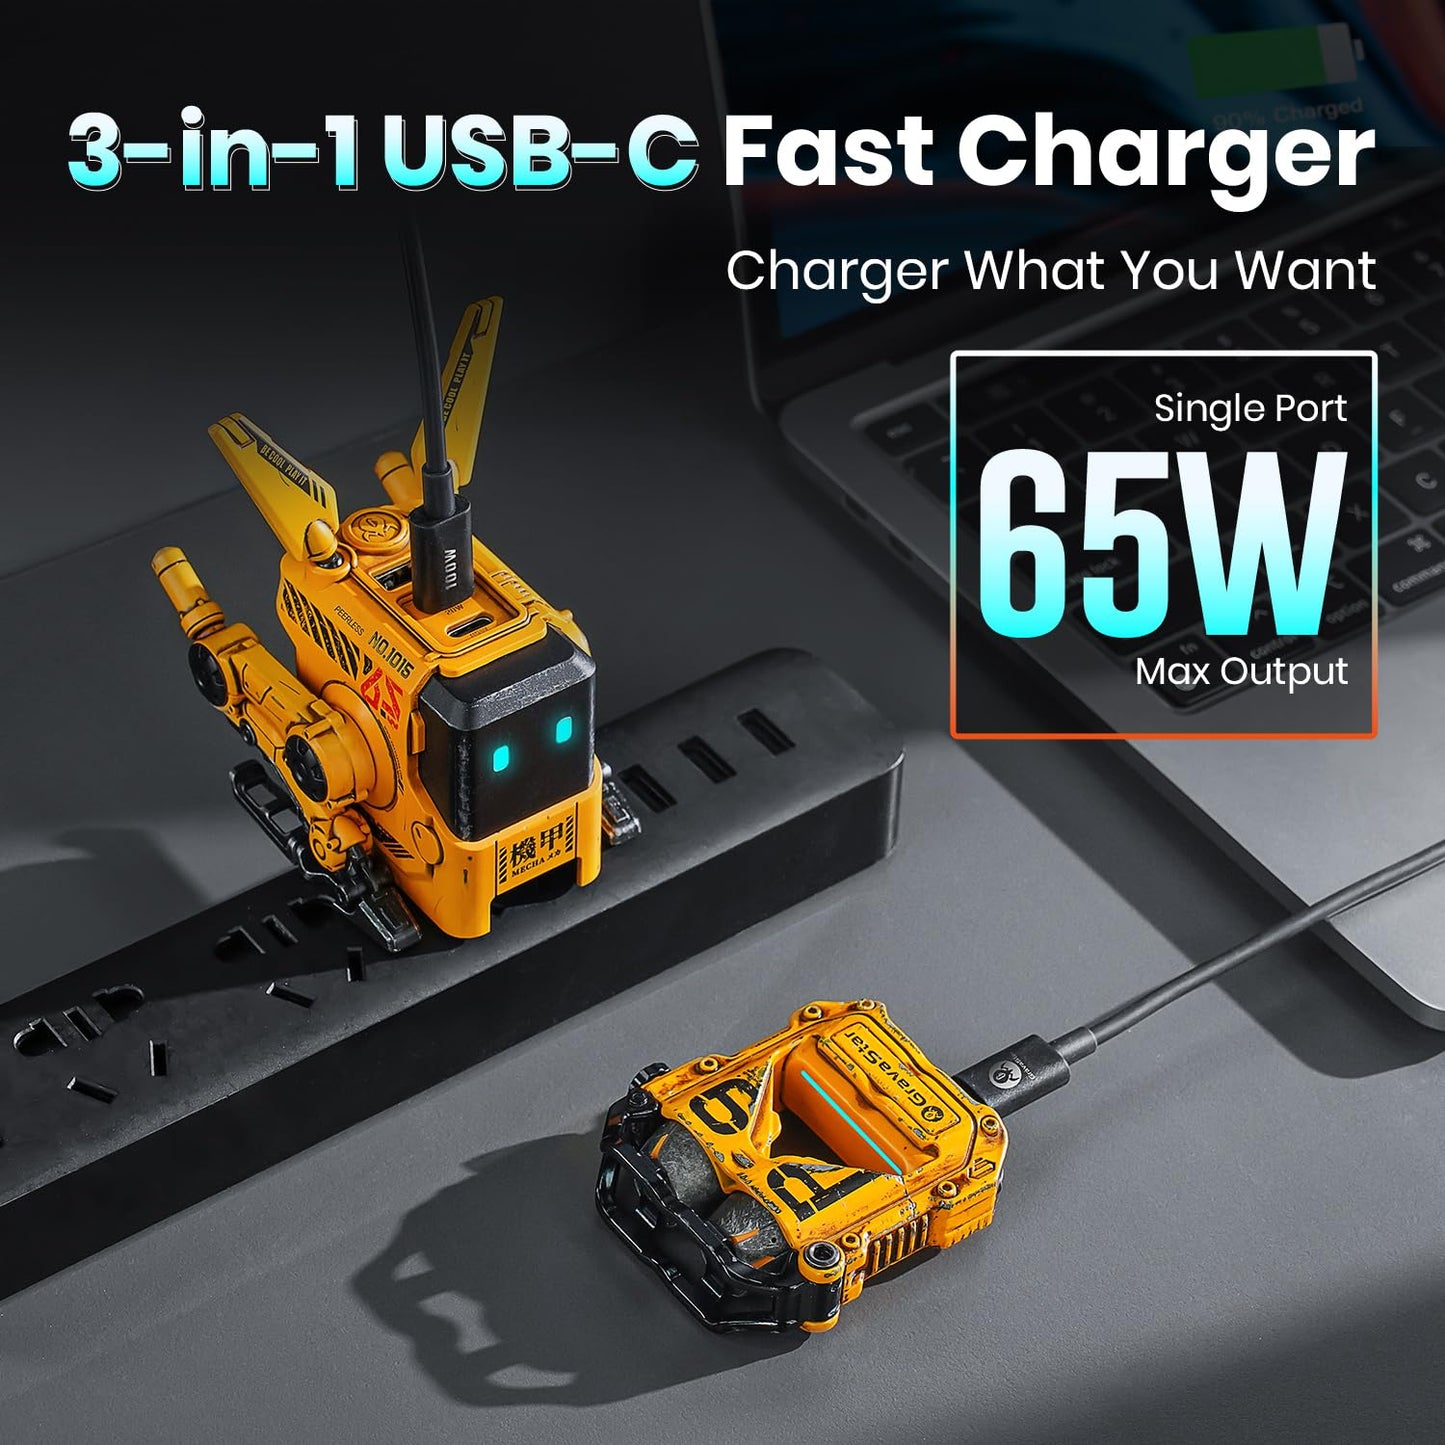 GravaStar 65W USB C Charger, Alpha65 Robot Fast GaN Charger Block, 3-Port Fast Power Adapter, Foldable Compact Wall USB C Charger for iPhone, MacBook, iPad, Galaxy S23/S24, Steam Deck (65W, Yellow)